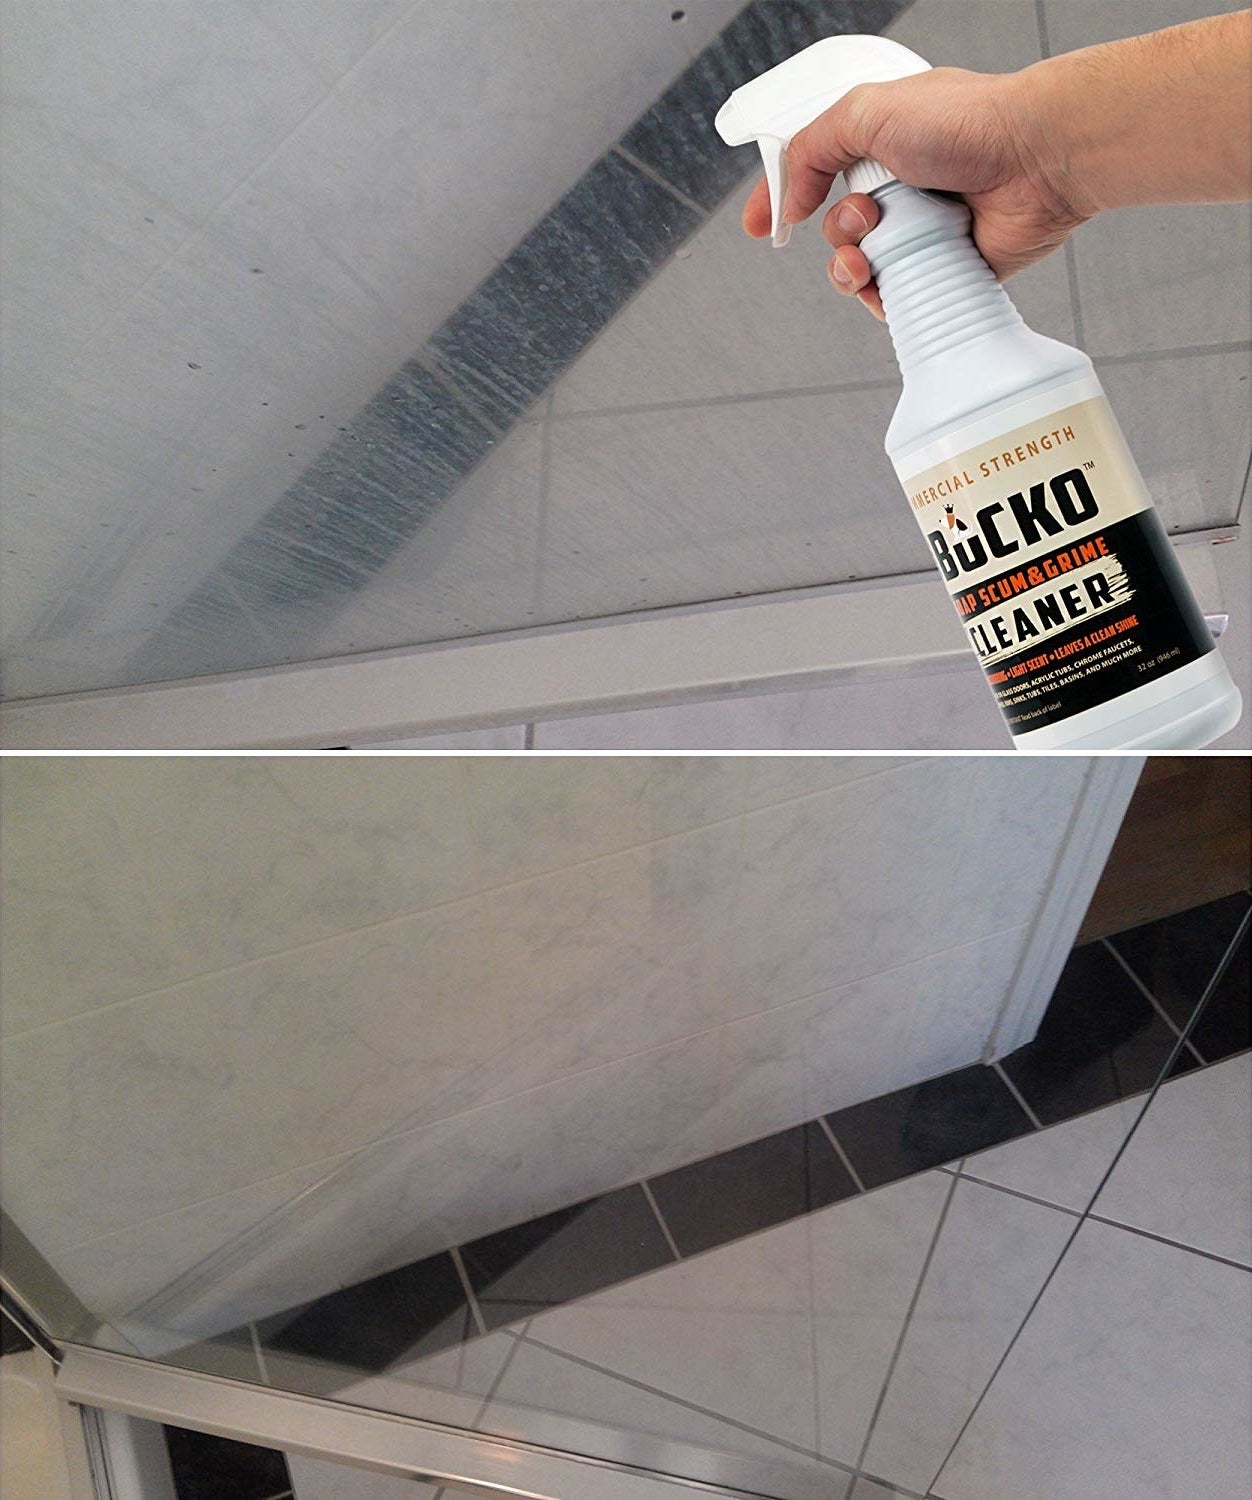 person spraying shower with the cleaner